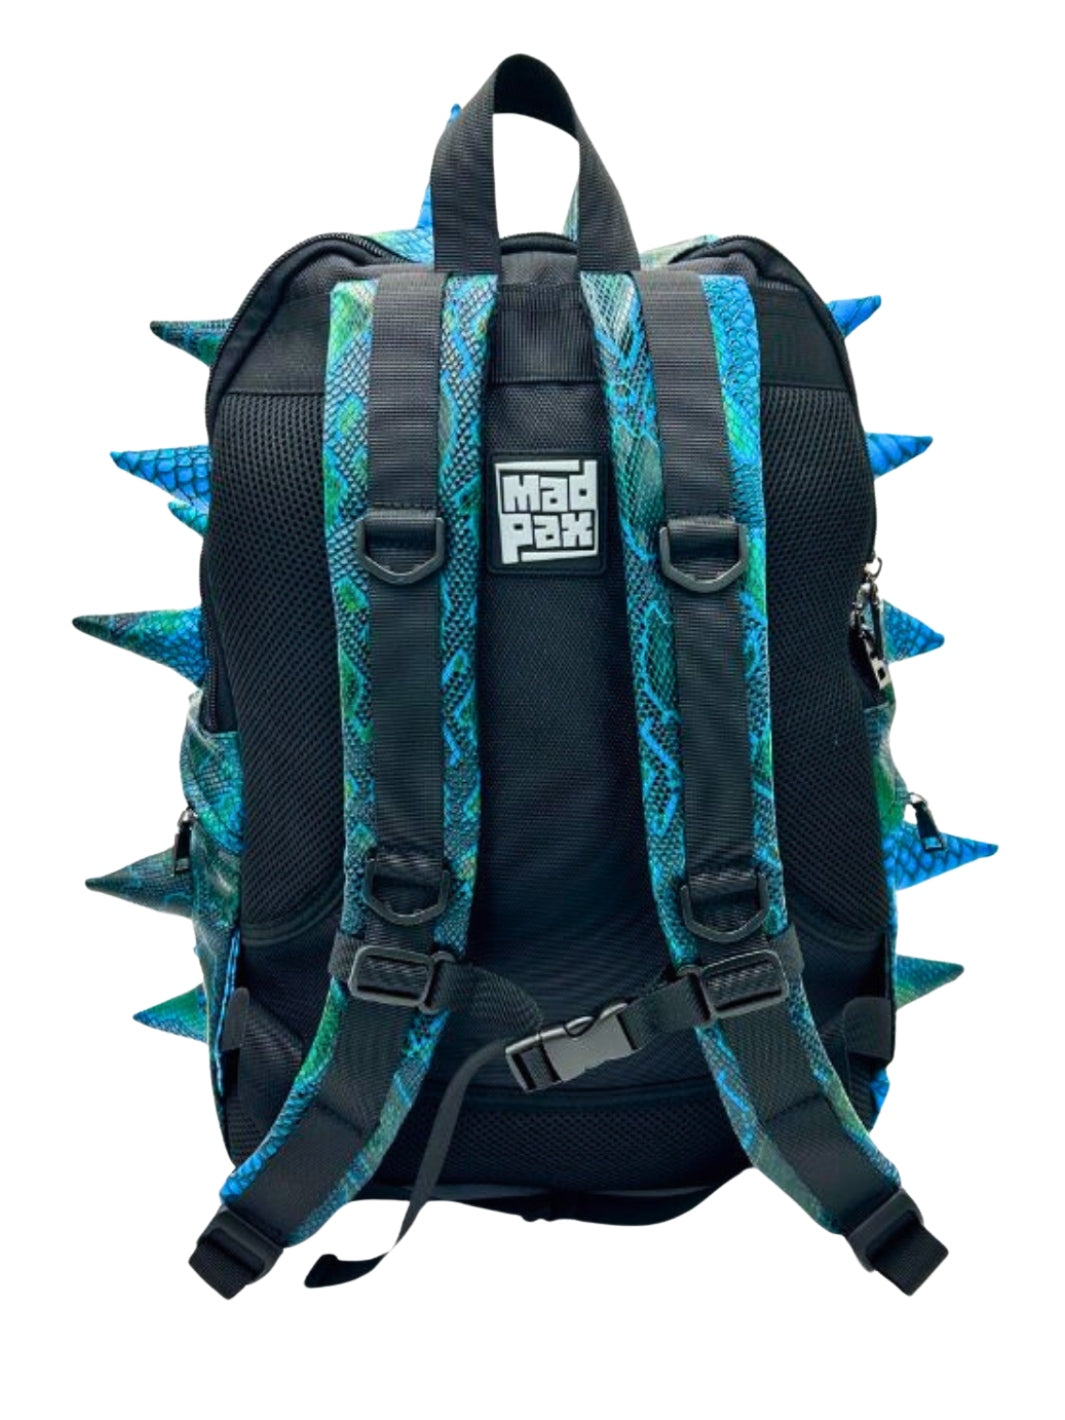 Back View of Blue Mamba Blue Backpack